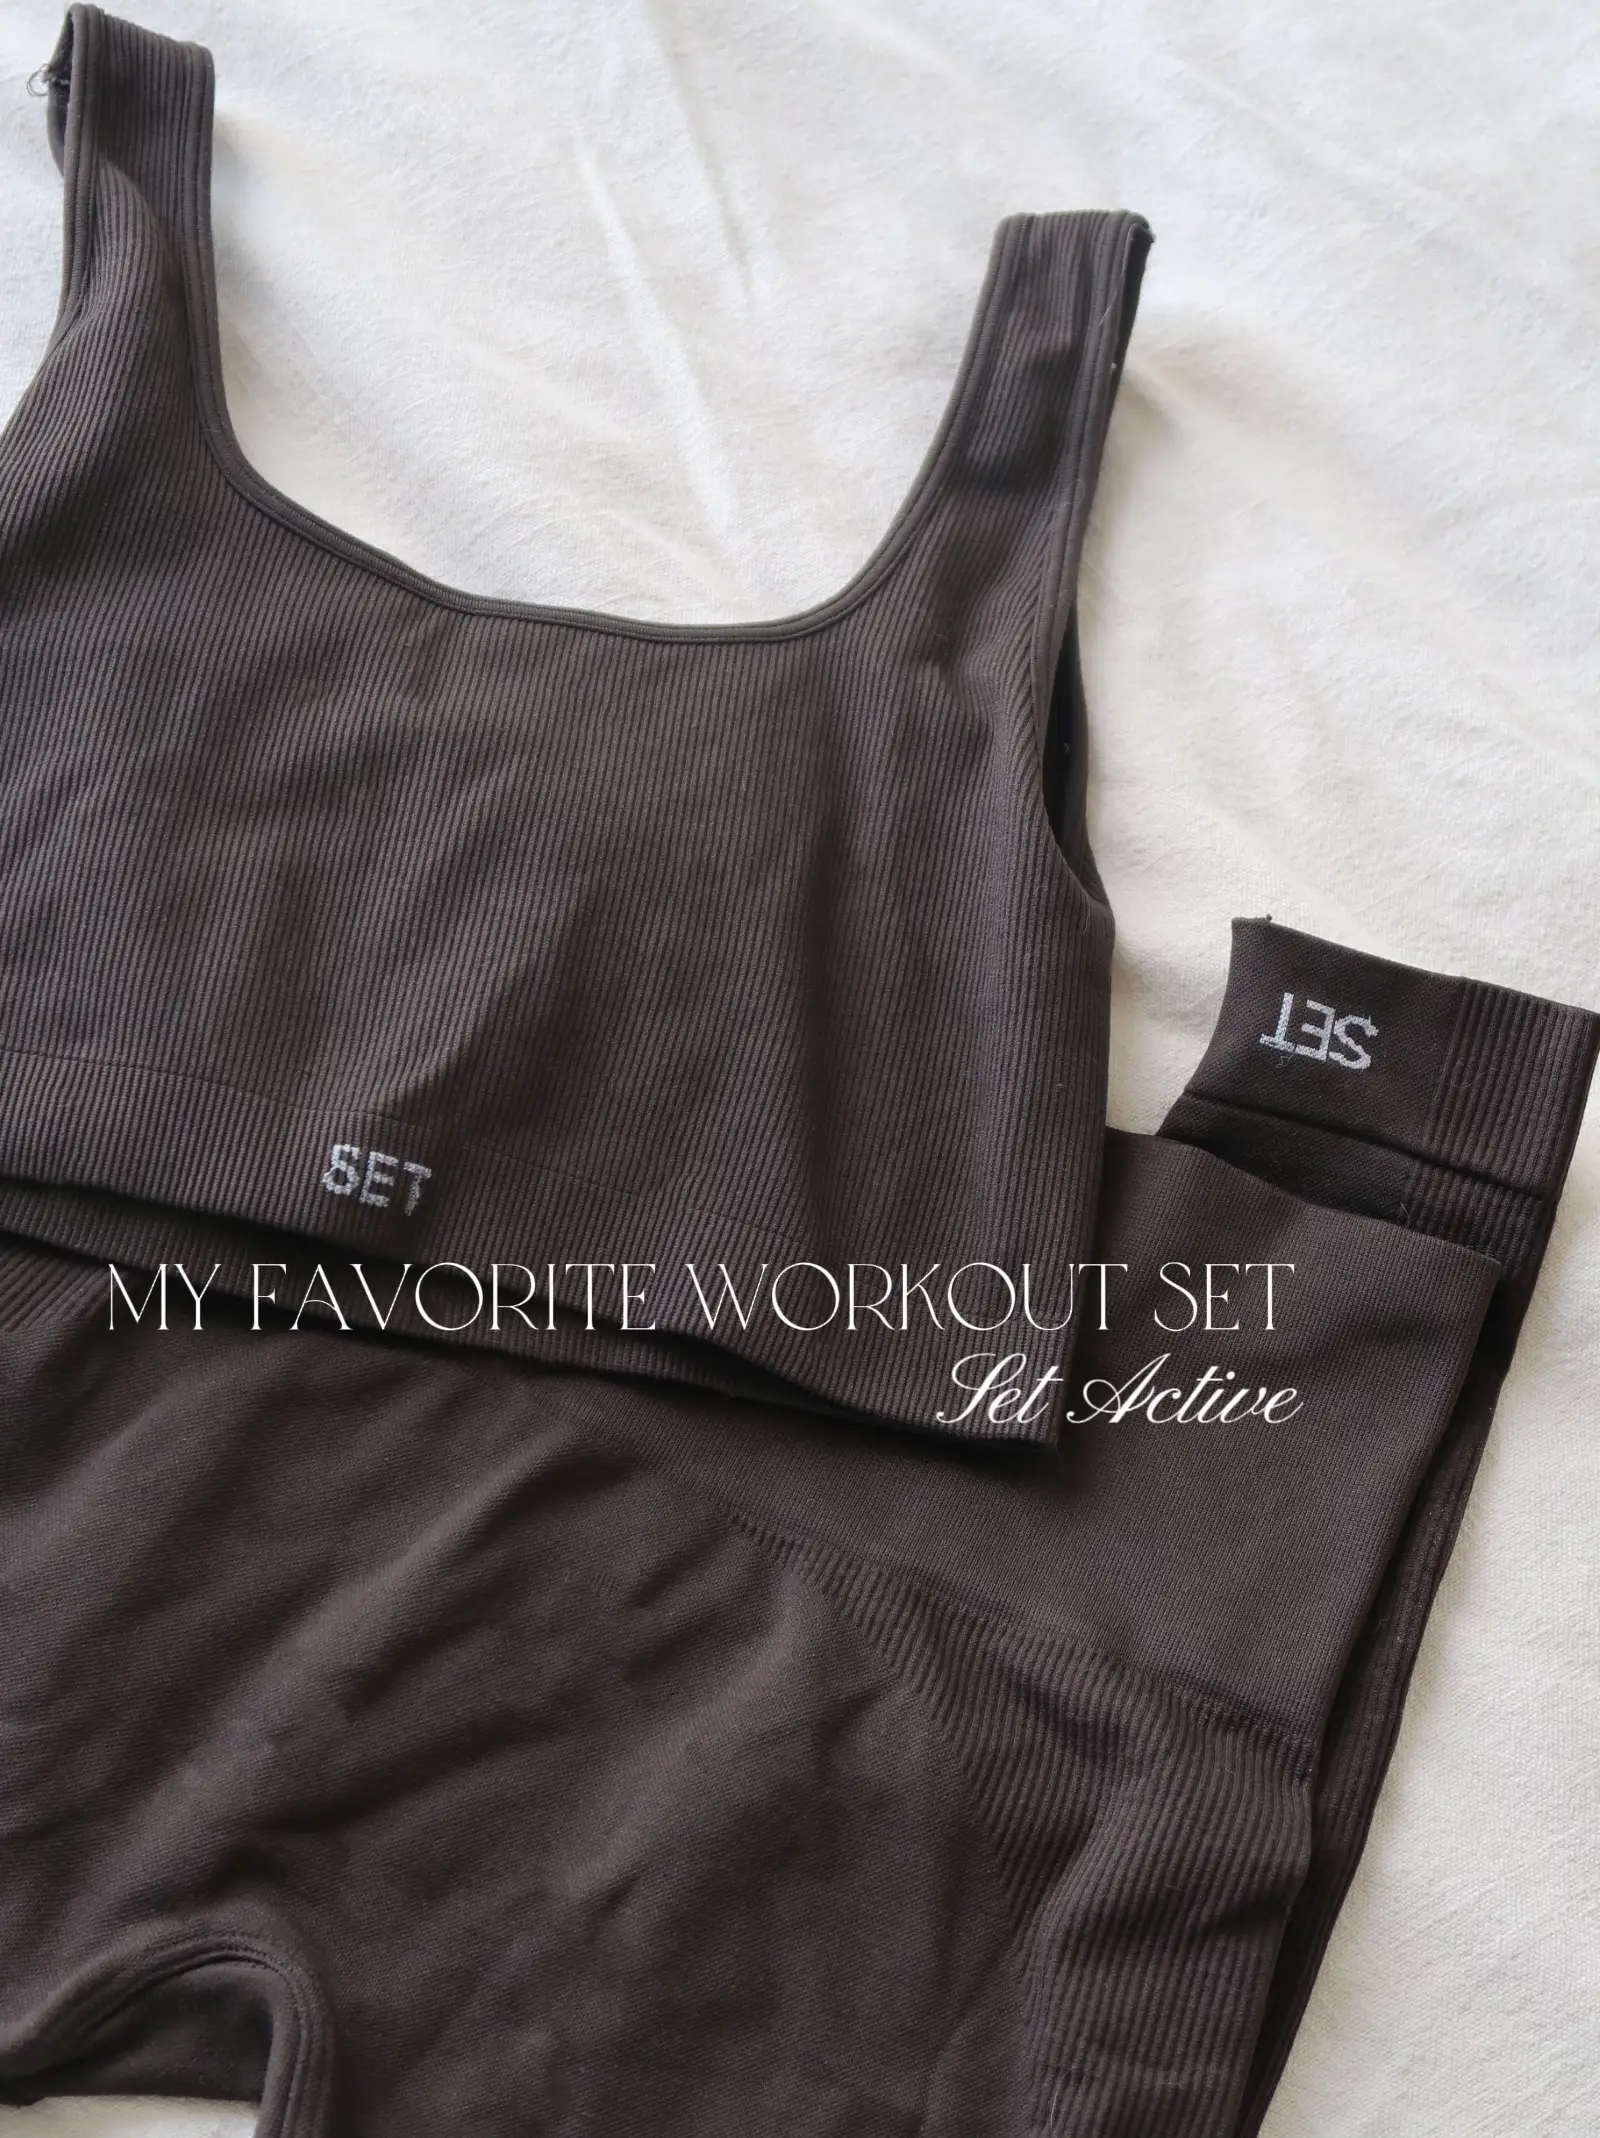 My favorite workout sets!, Gallery posted by Amora ✨🌙